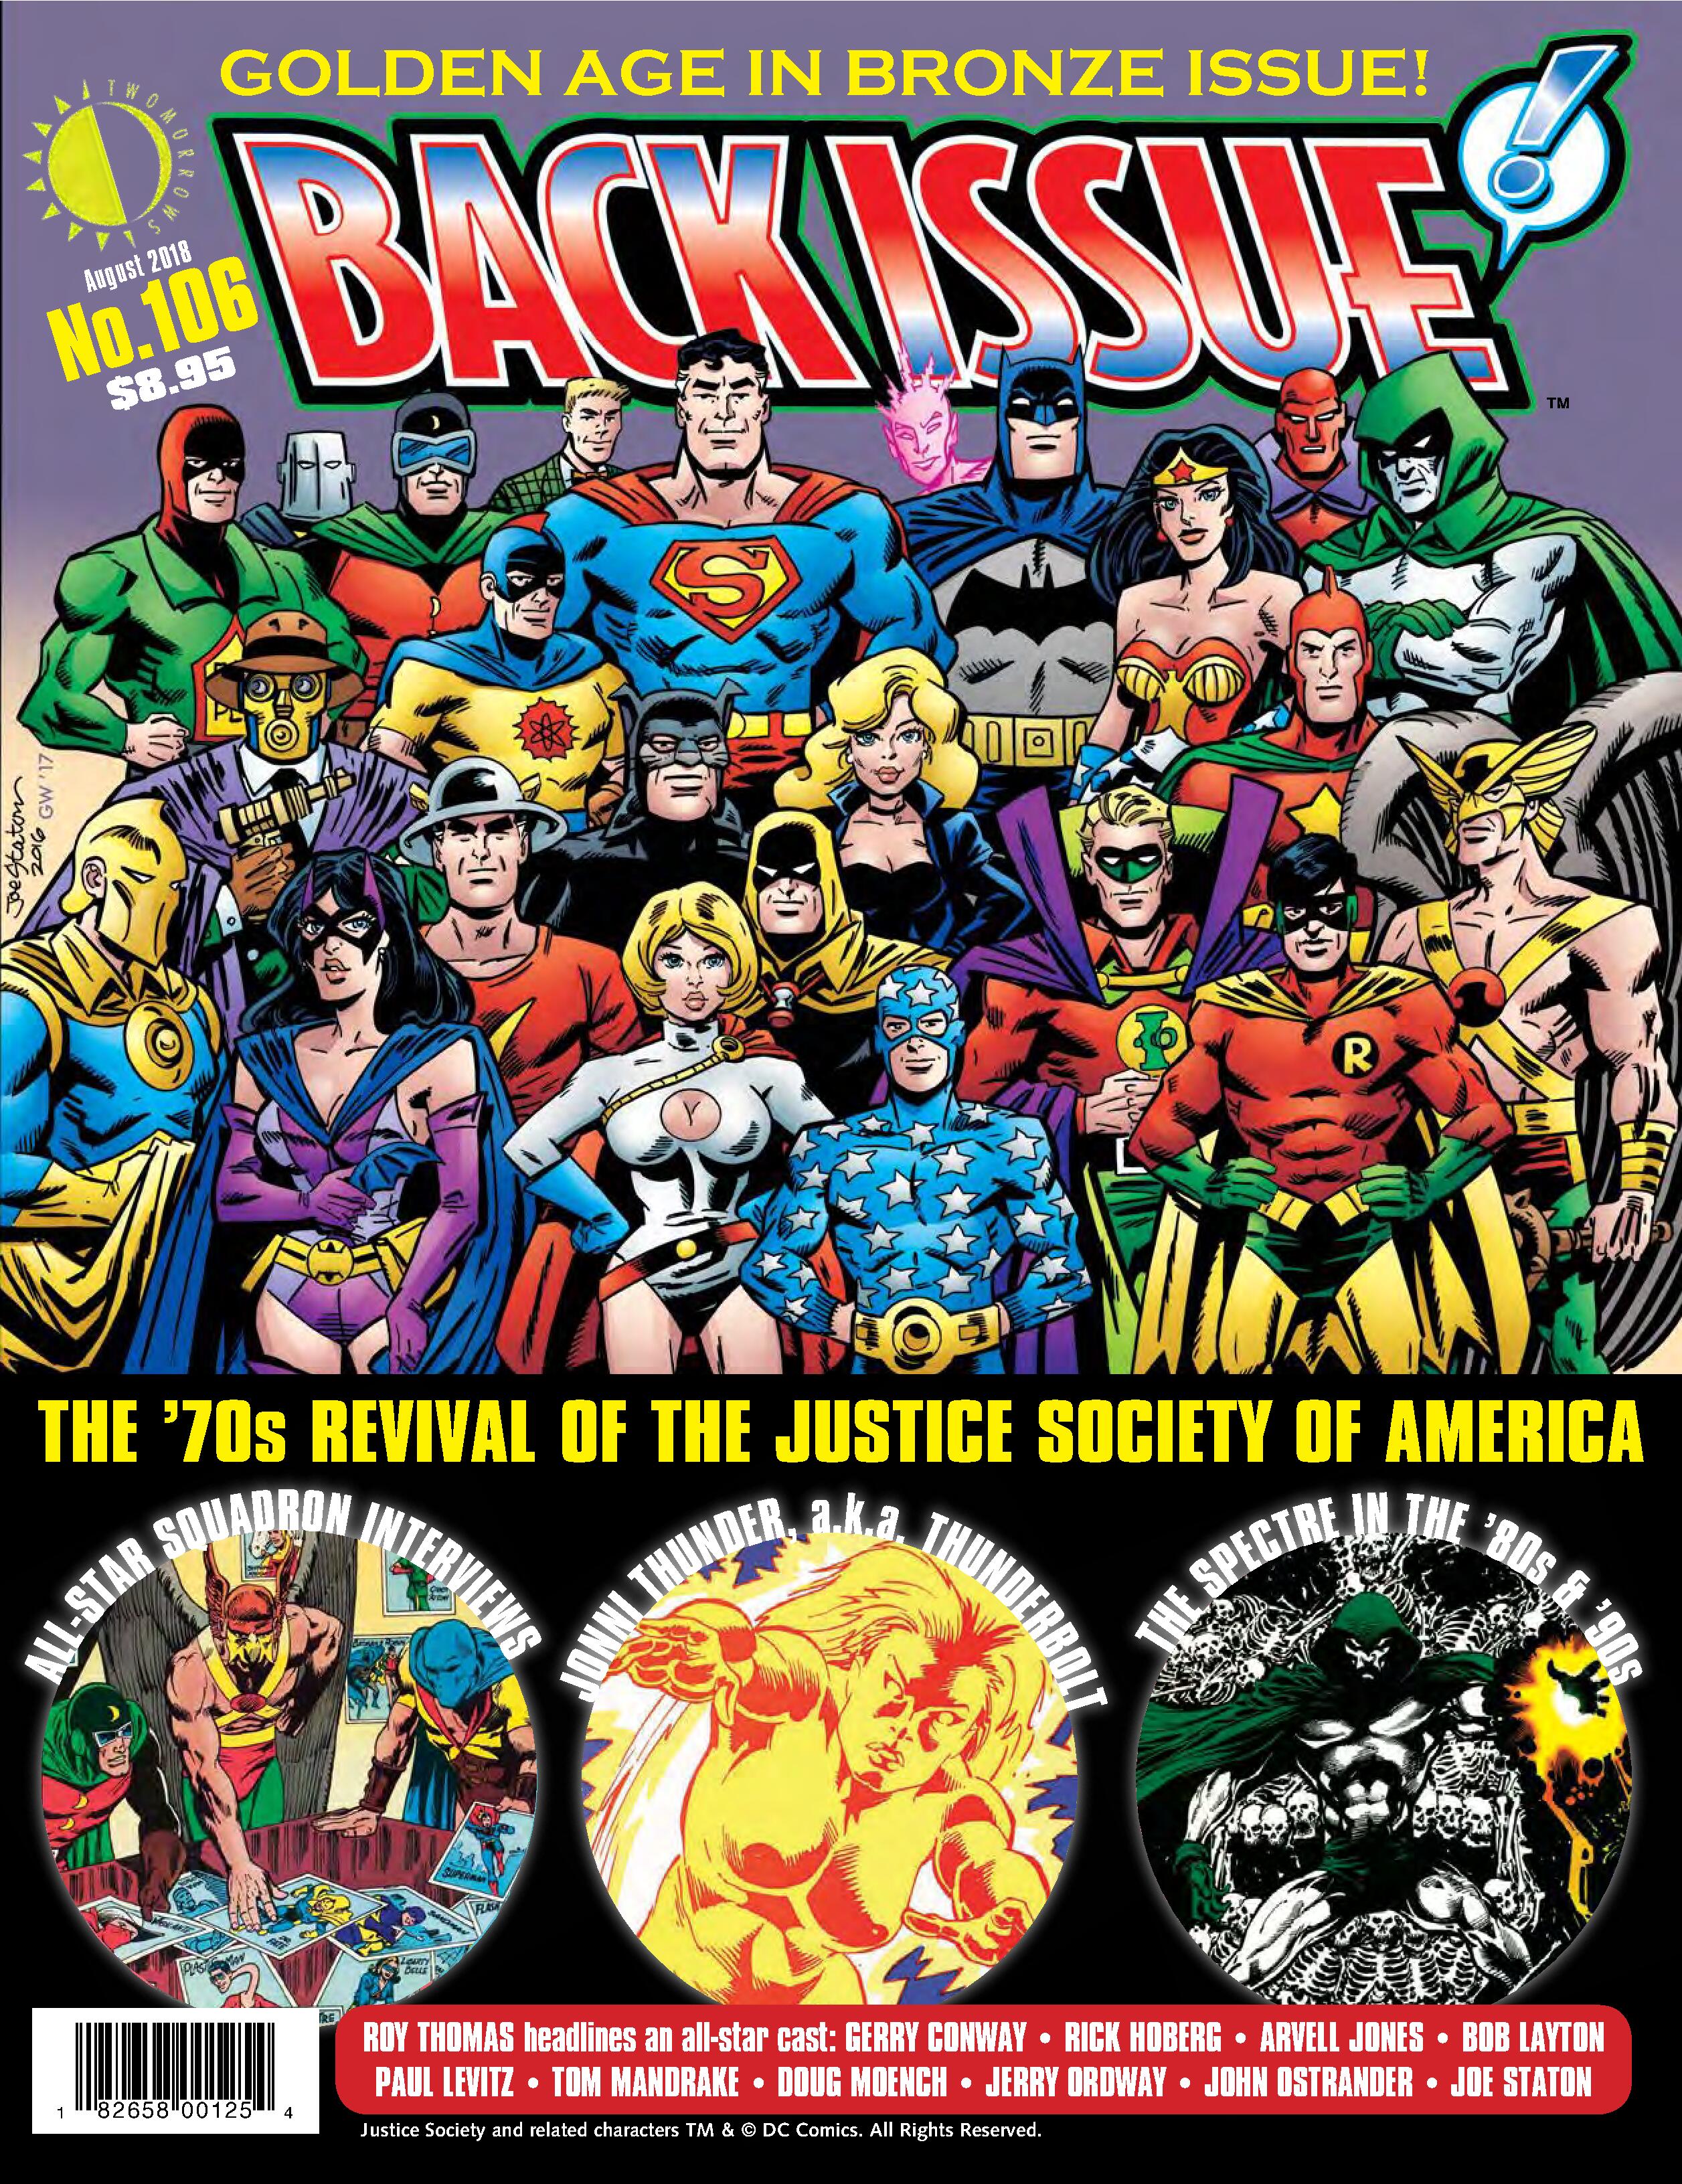 Read online Back Issue comic -  Issue #106 - 1